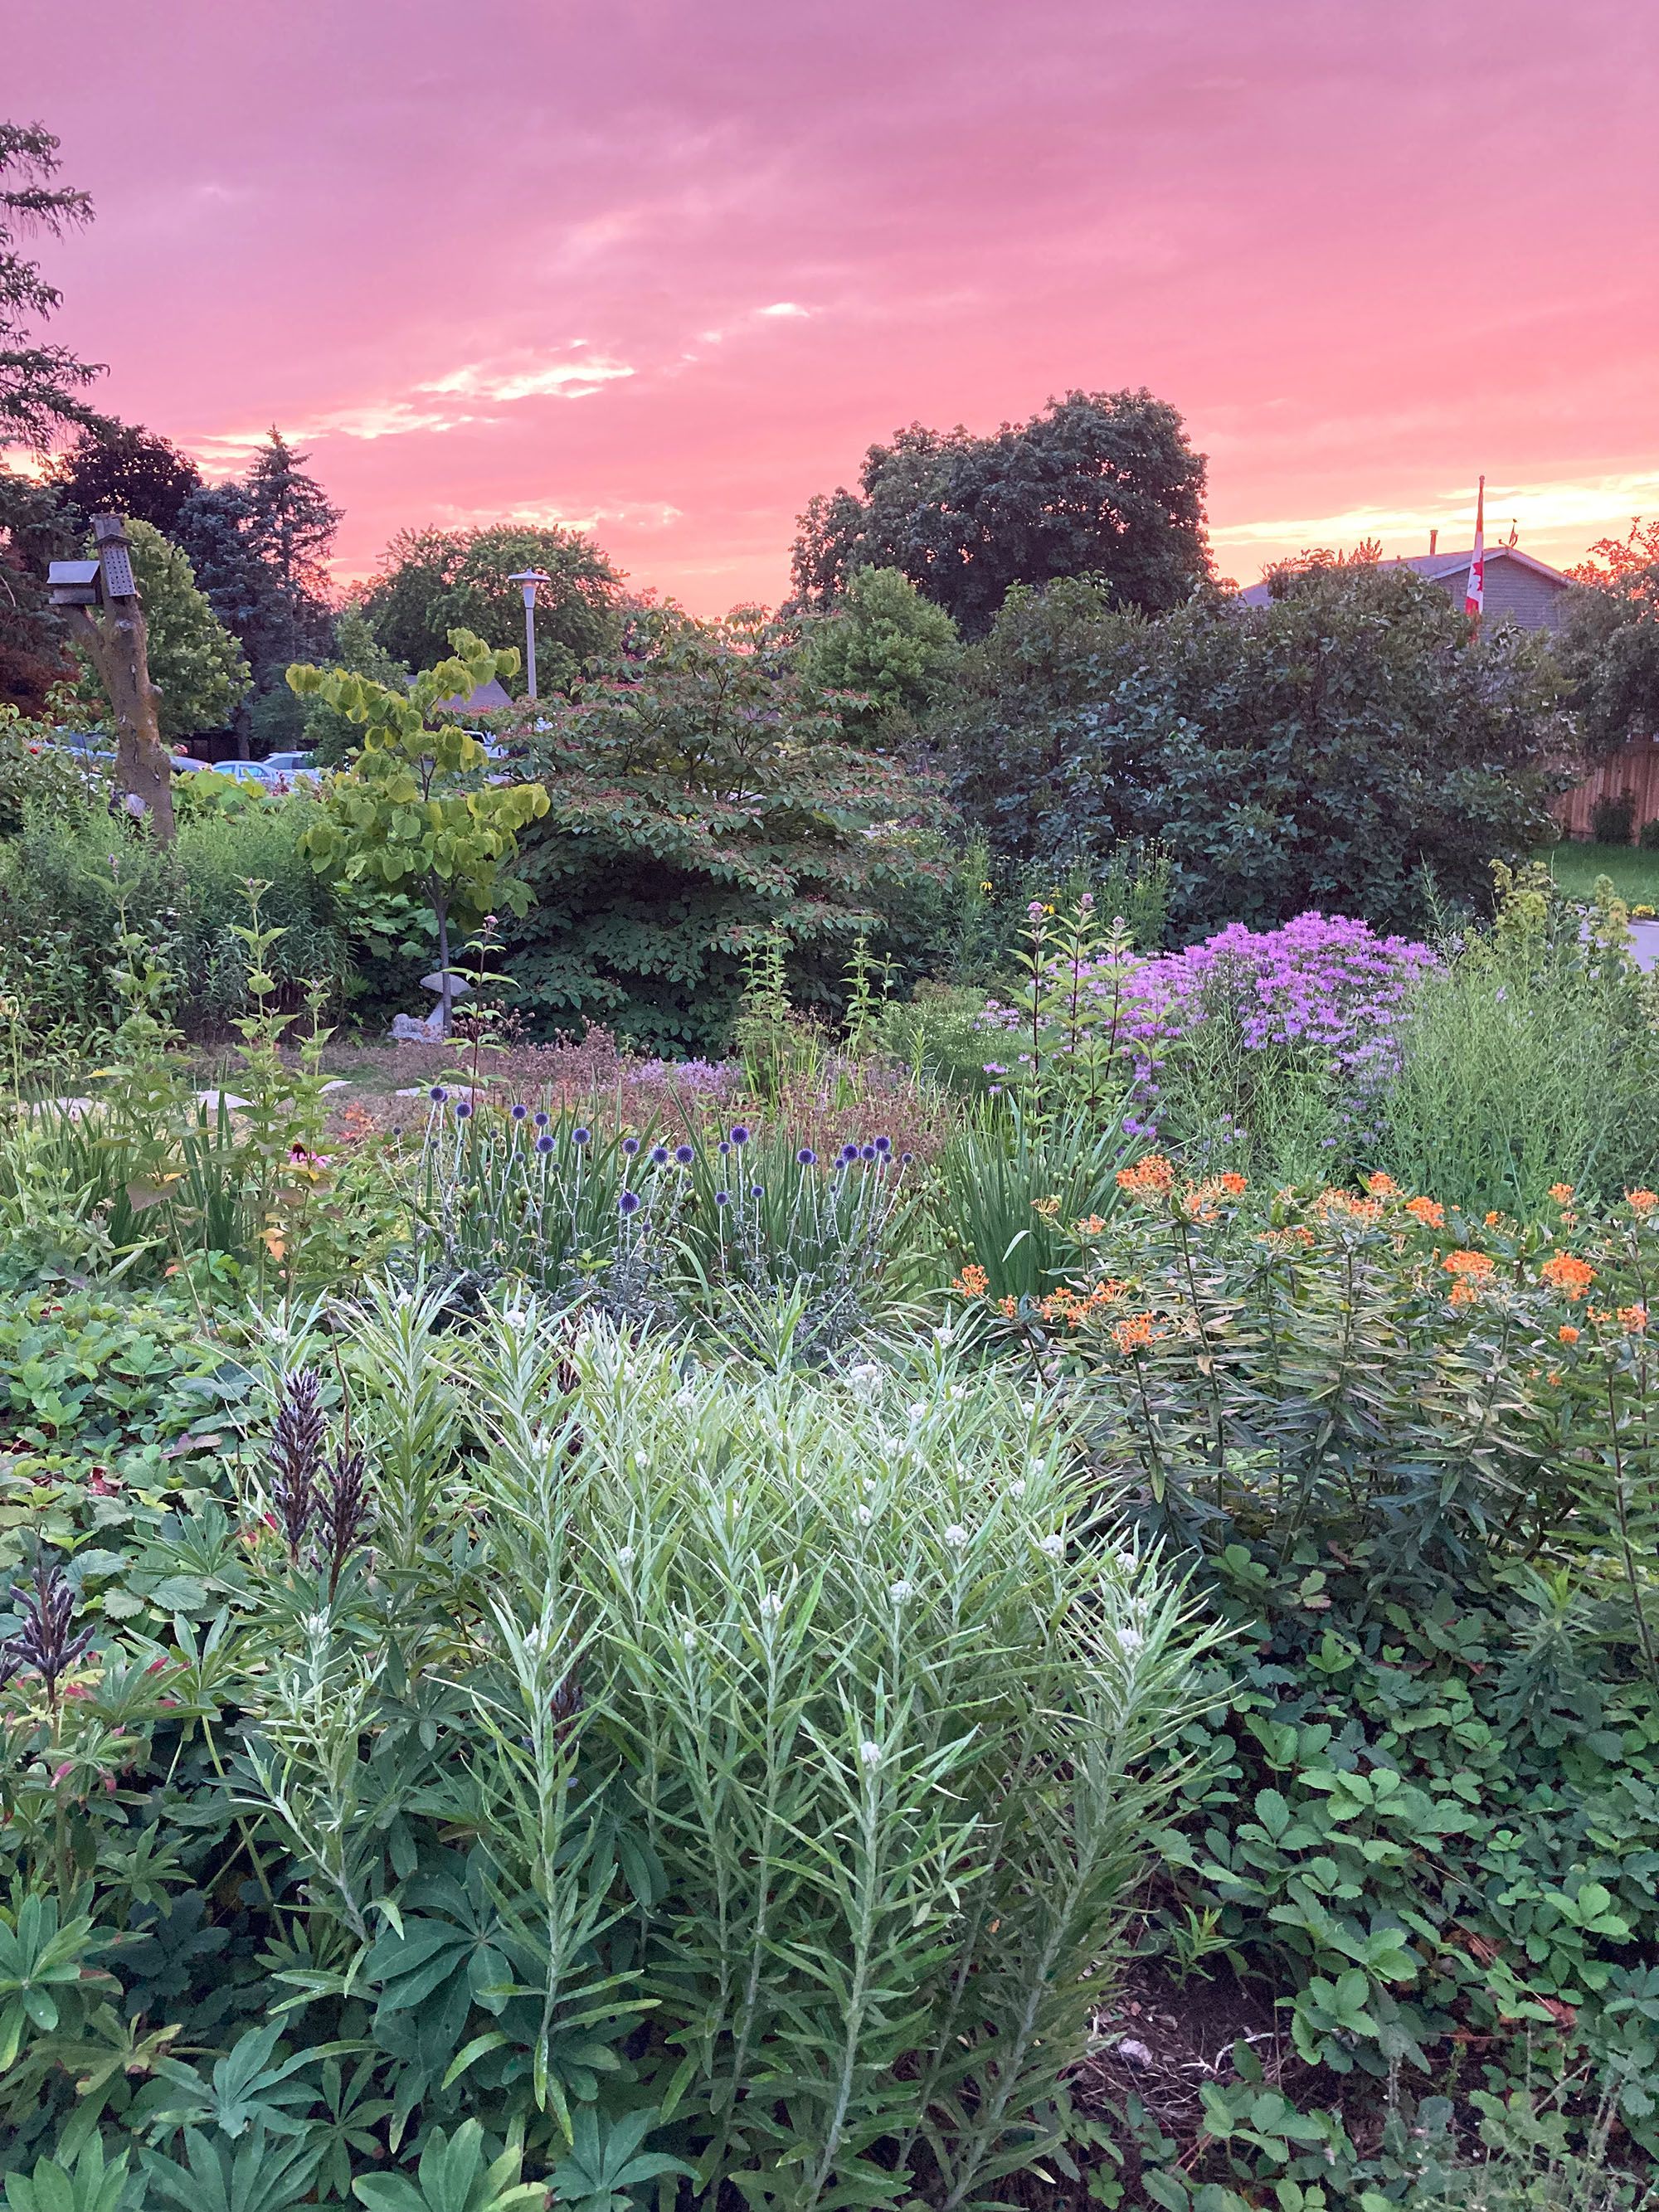 A purplish-pink sky with a lush garden in flower in front of it